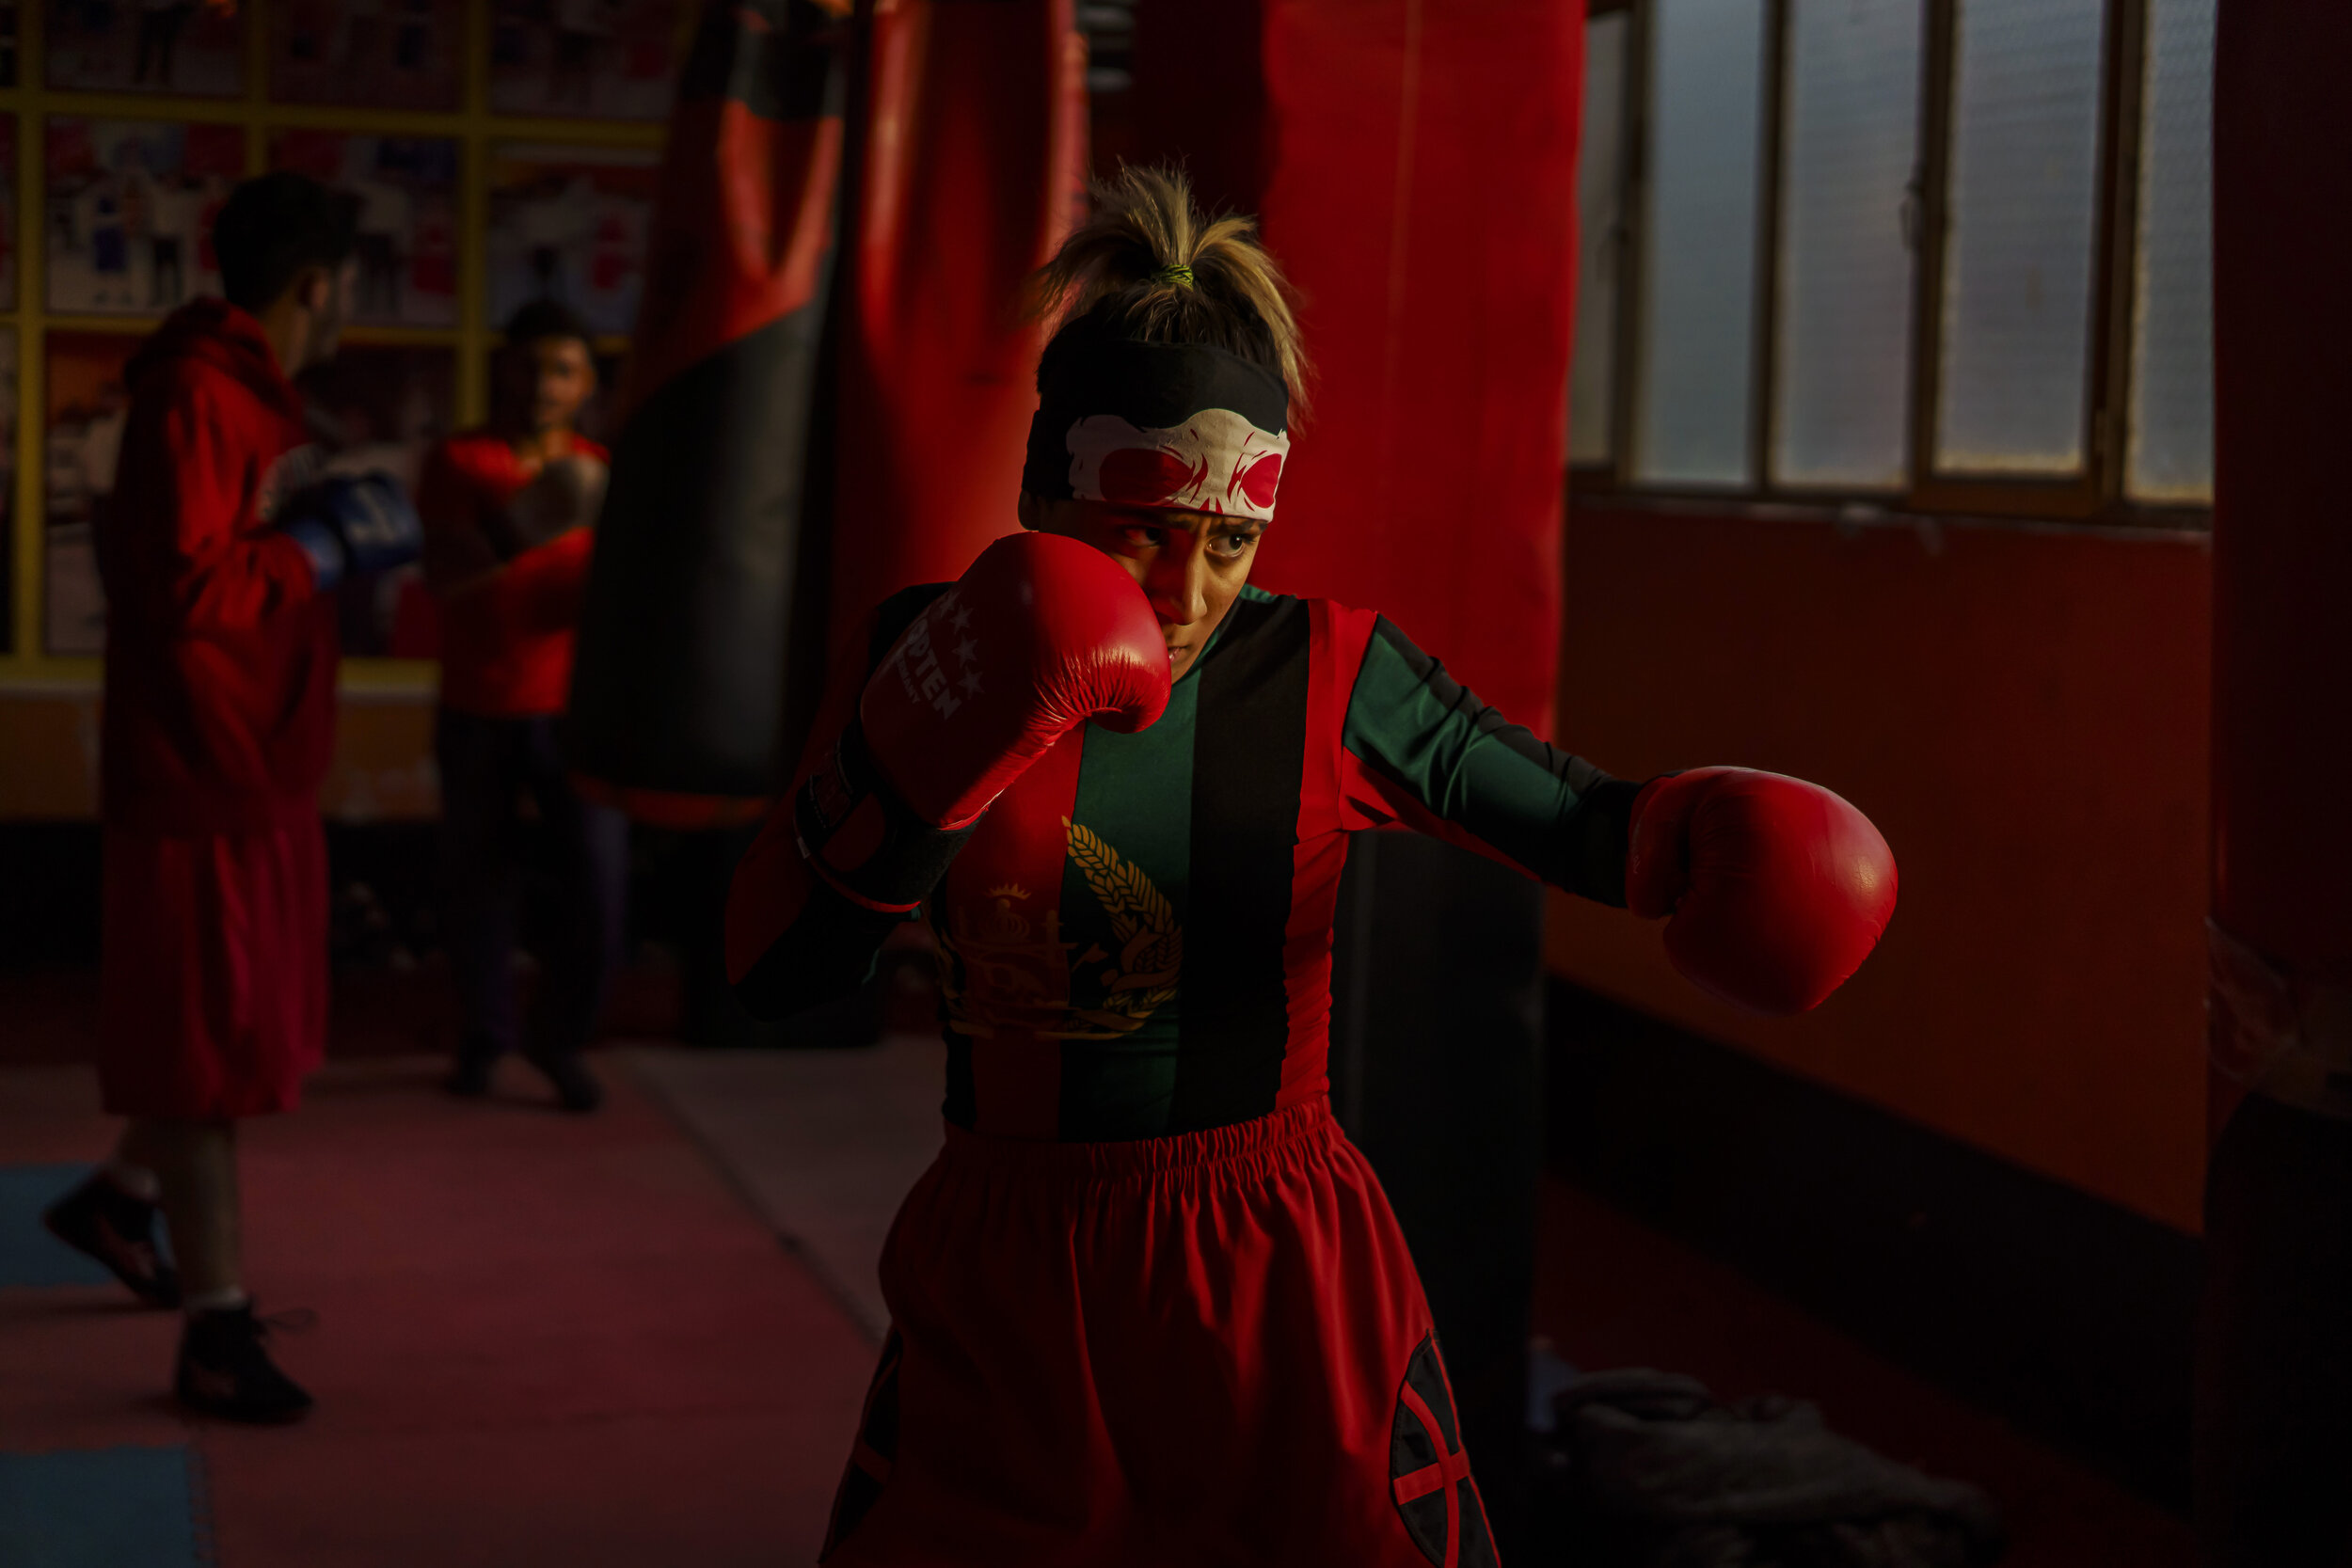  Khurshid Muhammadi, 16, trains for boxing at Berzhad Boxing Gym three times a week in Kabul, Afghanistan, on Monday Nov. 9, 2020. Like many younger generation Afghans who grew up during the time of war, they are adamant to stay and fight, hoping the